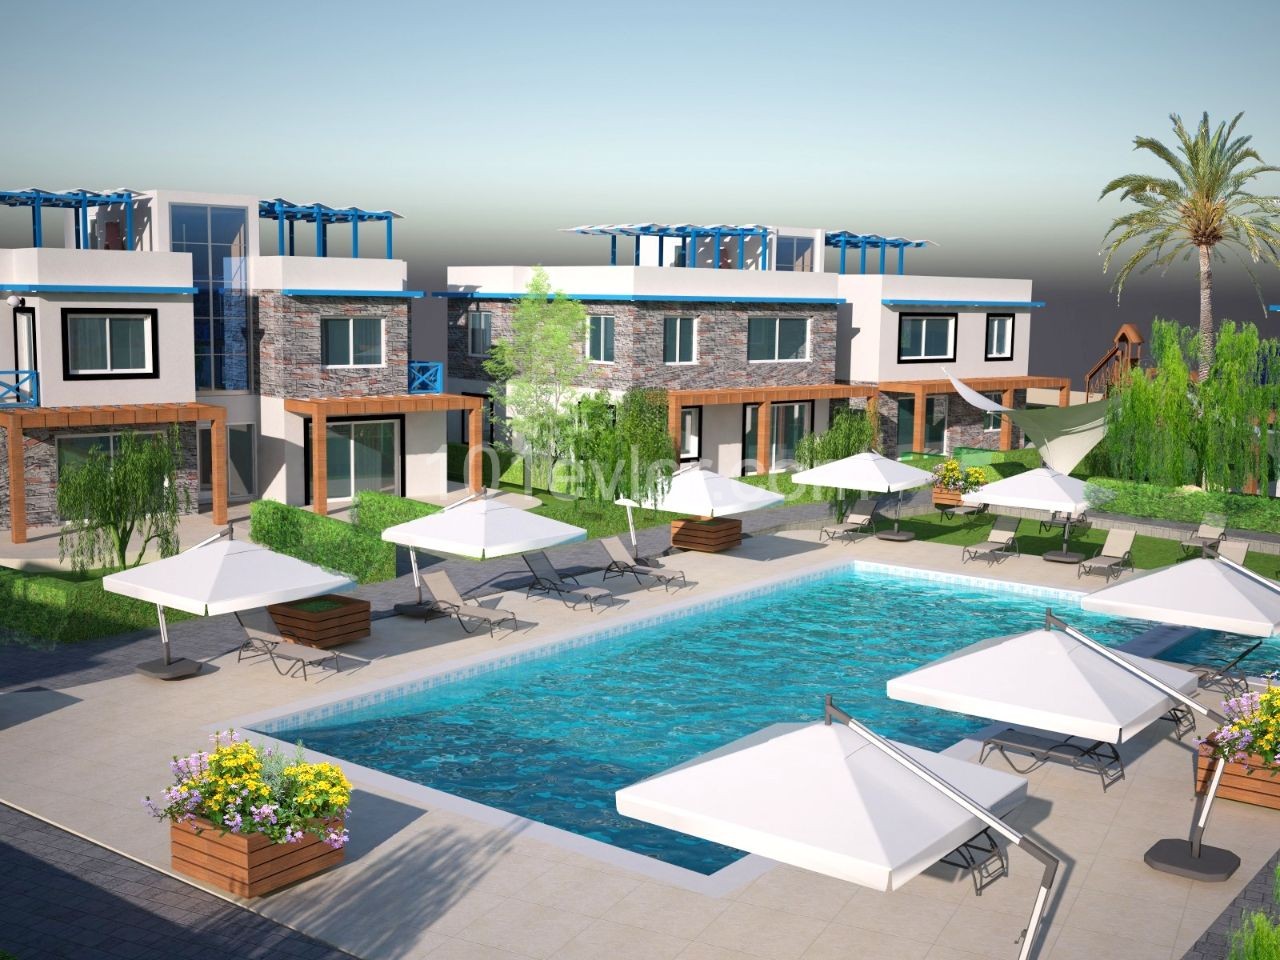 Turkish deed apartments in a complex with a pool, 300m from the sea in Karsiyaka, Girne. With ground floor or upper floor terrace options.05338403555 ** 